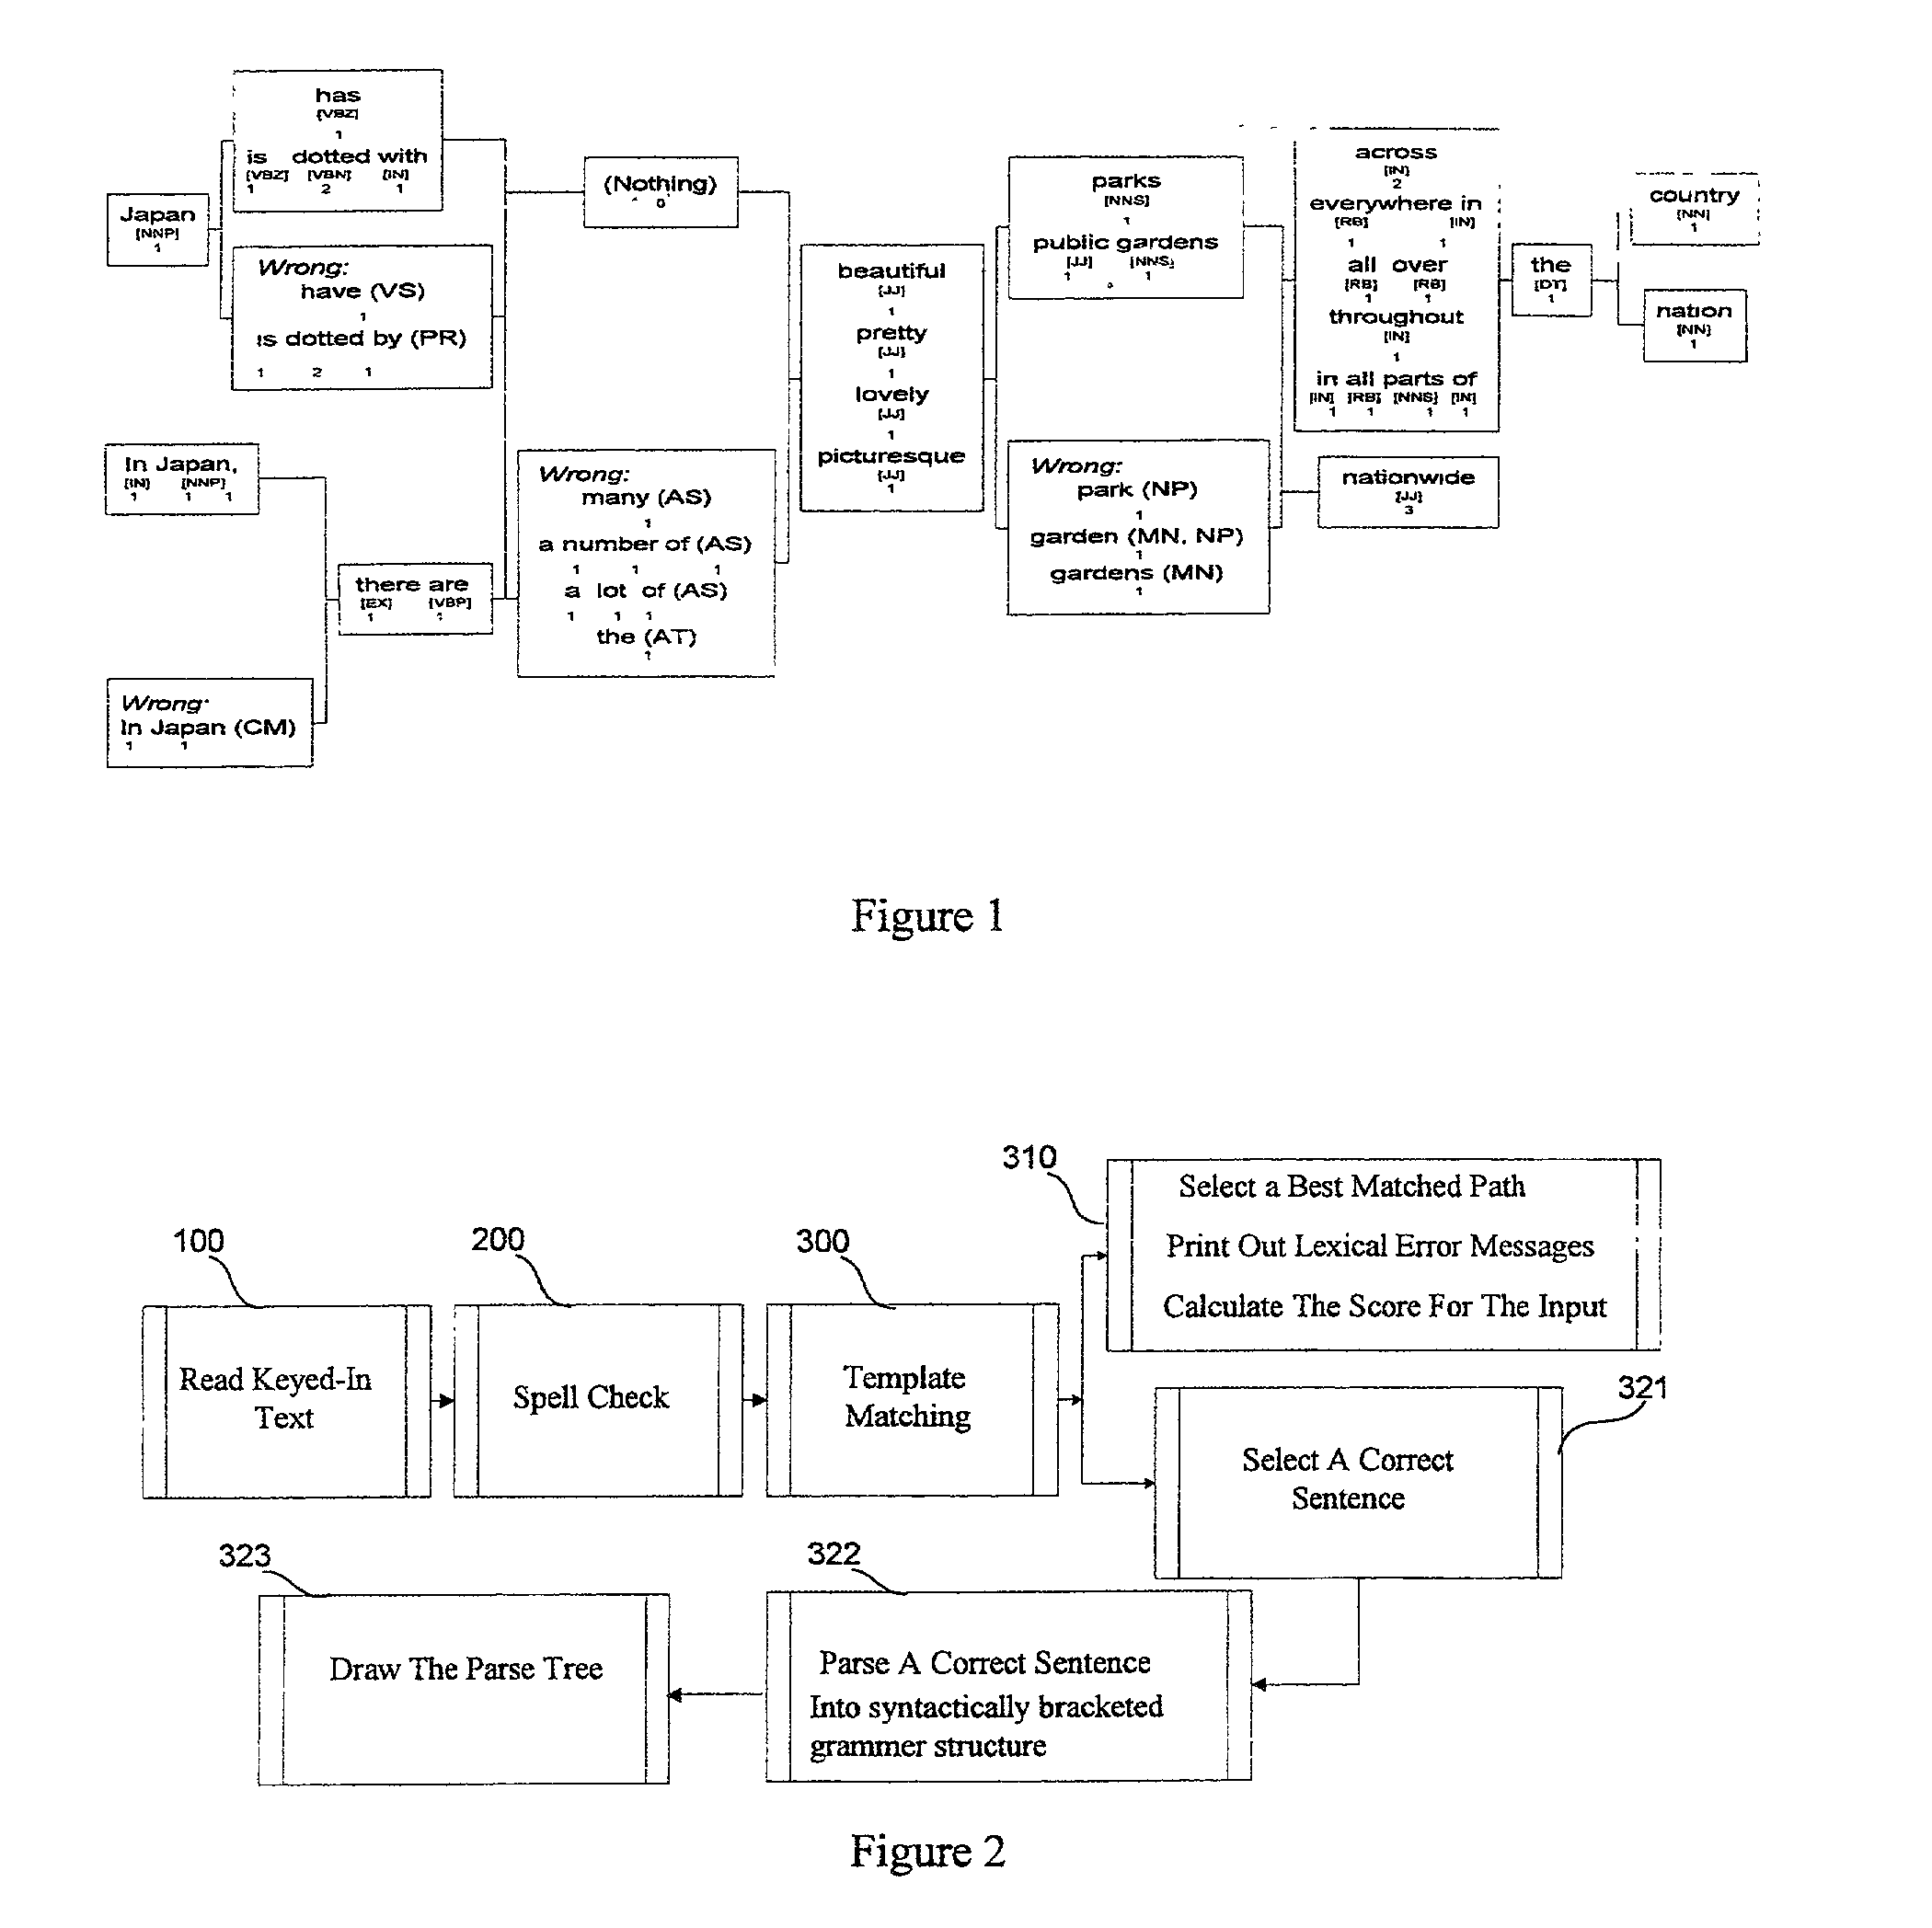 System and method for accurate grammar analysis using a part-of-speech tagged (POST) parser and learners' model